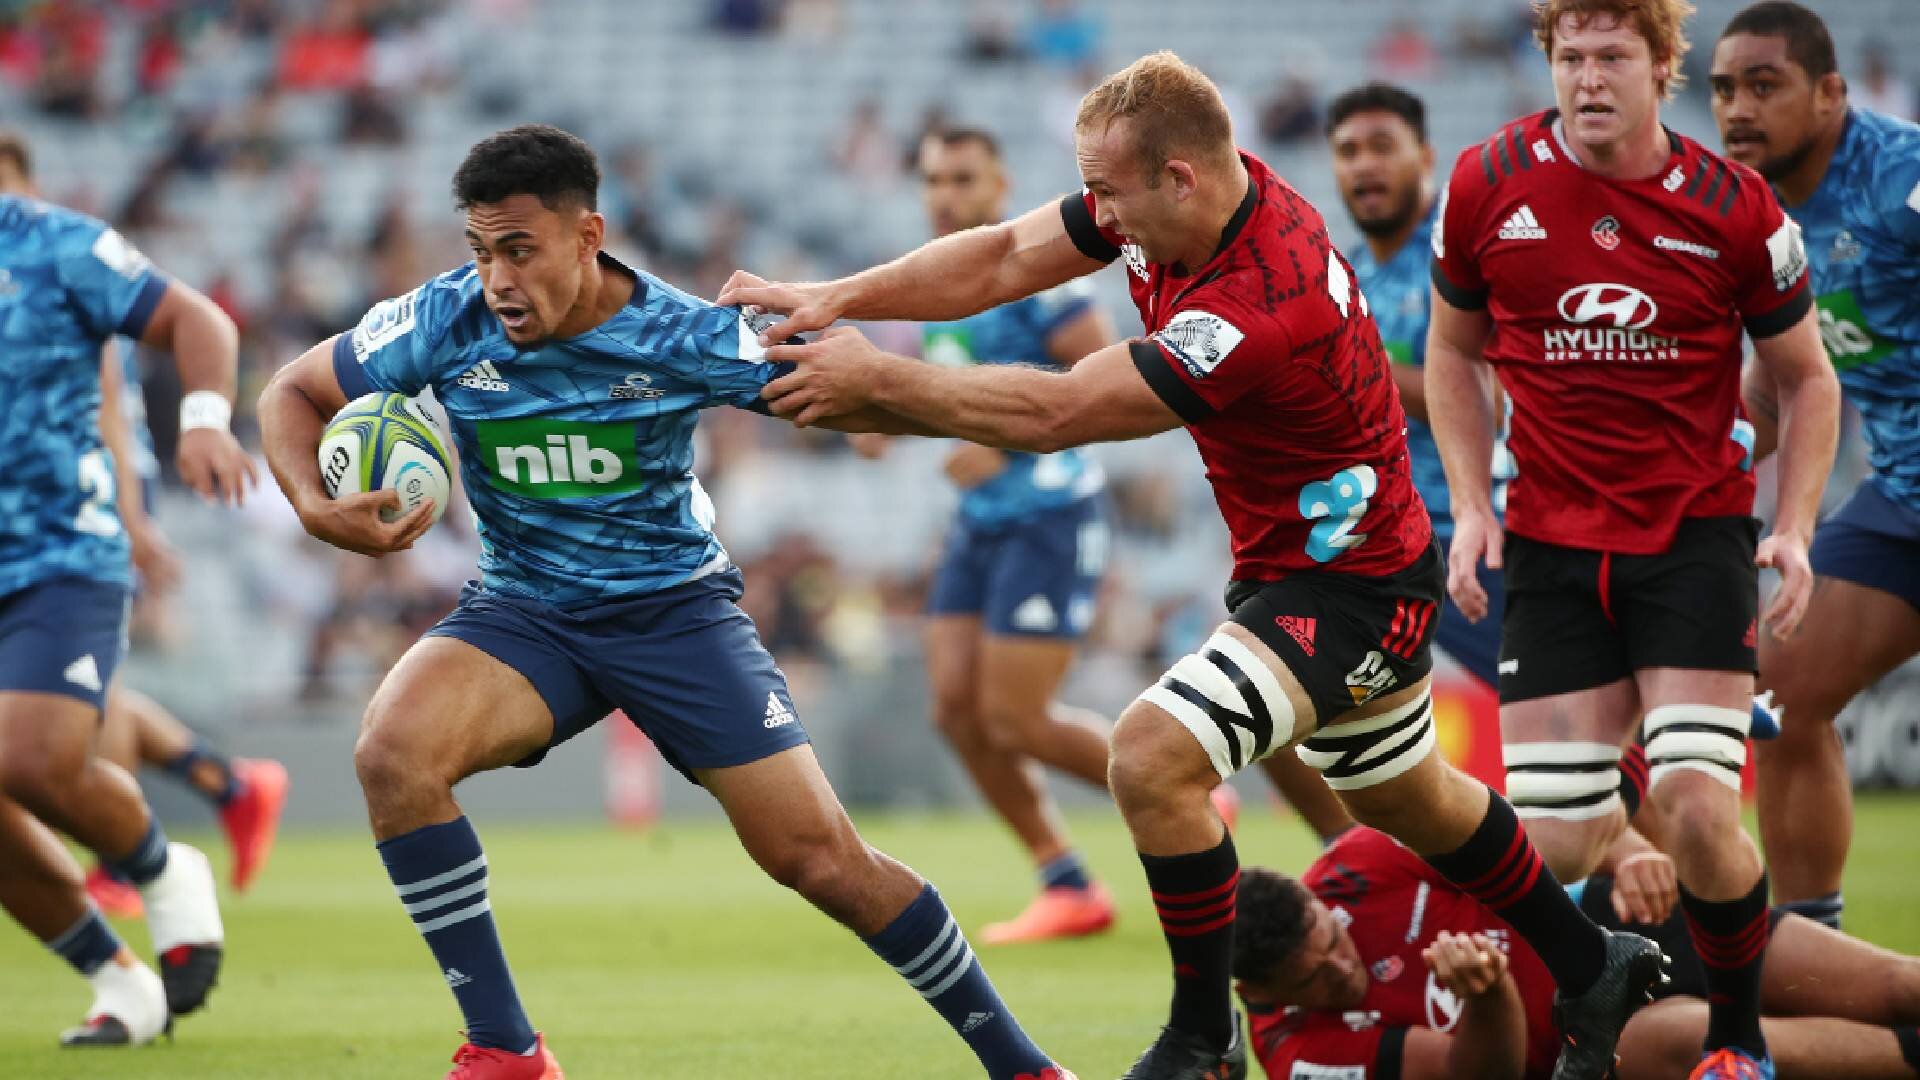 The two teams that can challenge the Crusaders for the 2021 Super Rugby Aotearoa title